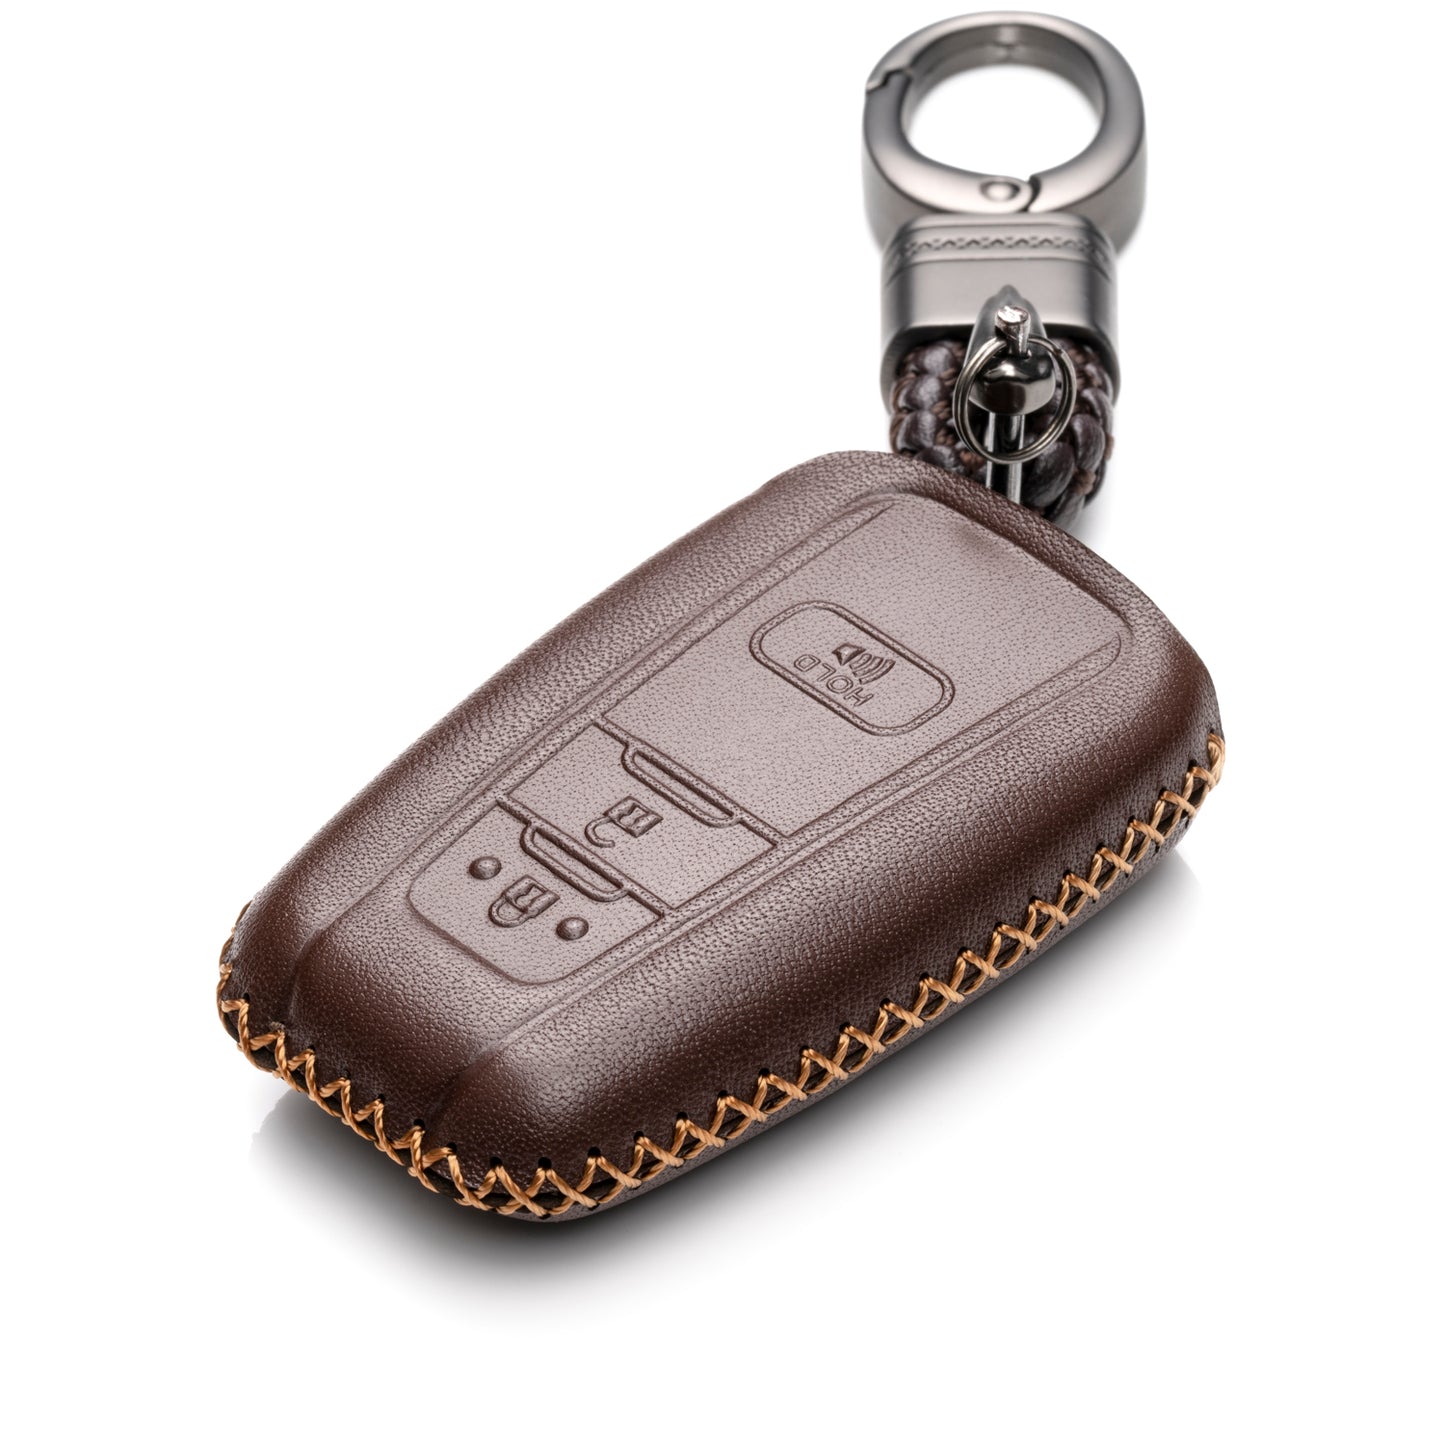 Vitodeco 3-Button Genuine Leather Smart Key Fob Case Compatible with Toyota Rav4 2021, Camry 2022, Prius 2021, Highlander 2022, CH-R 2021, Avalon 2021, Toyota 86 2020, Mirai 2022